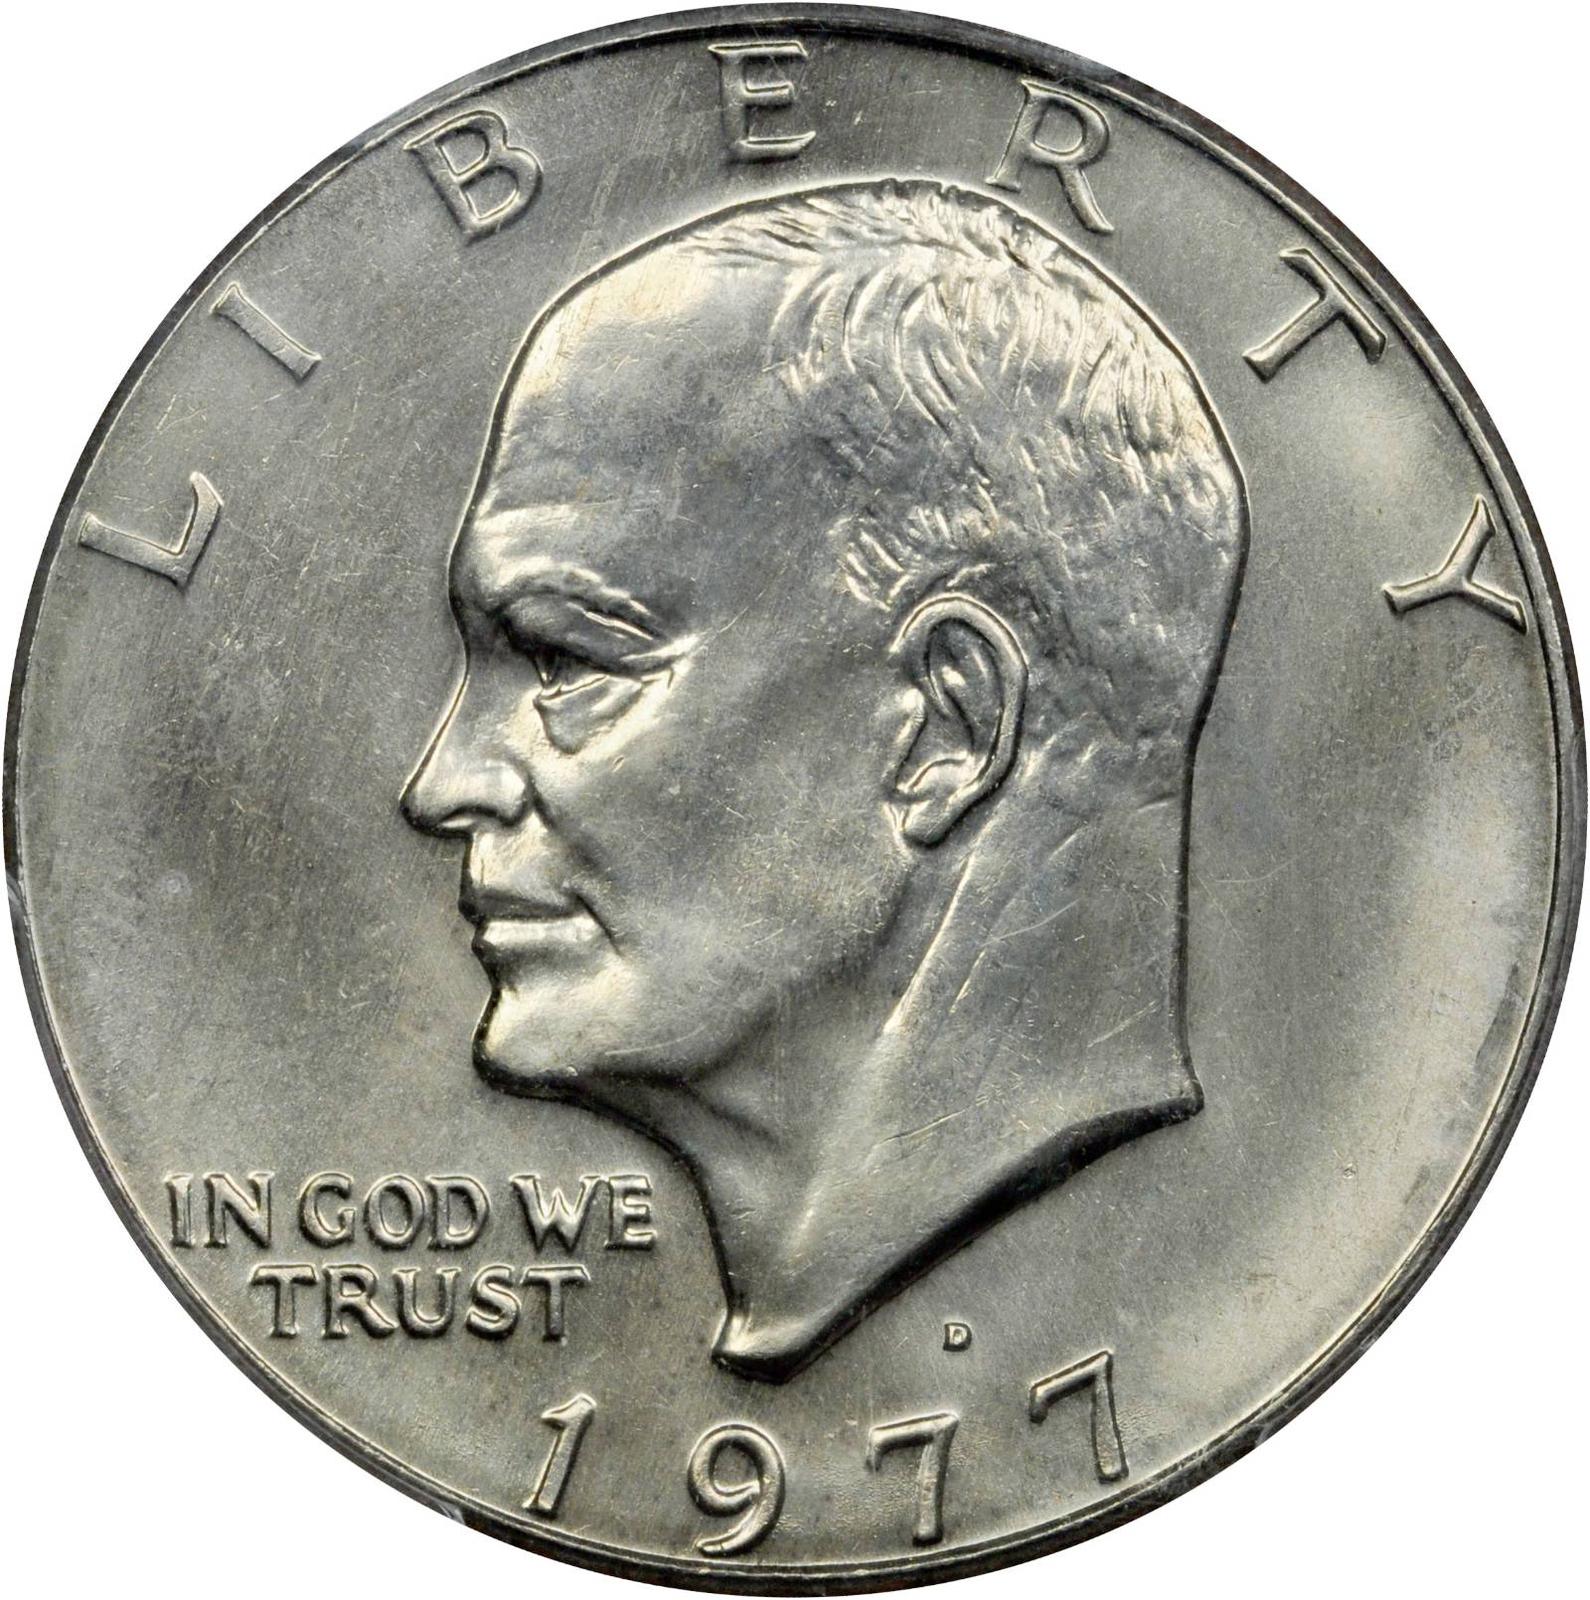 Value Of 1977 D Eisenhower Dollar Sell Modern Coins,Turtle Shell Drawing